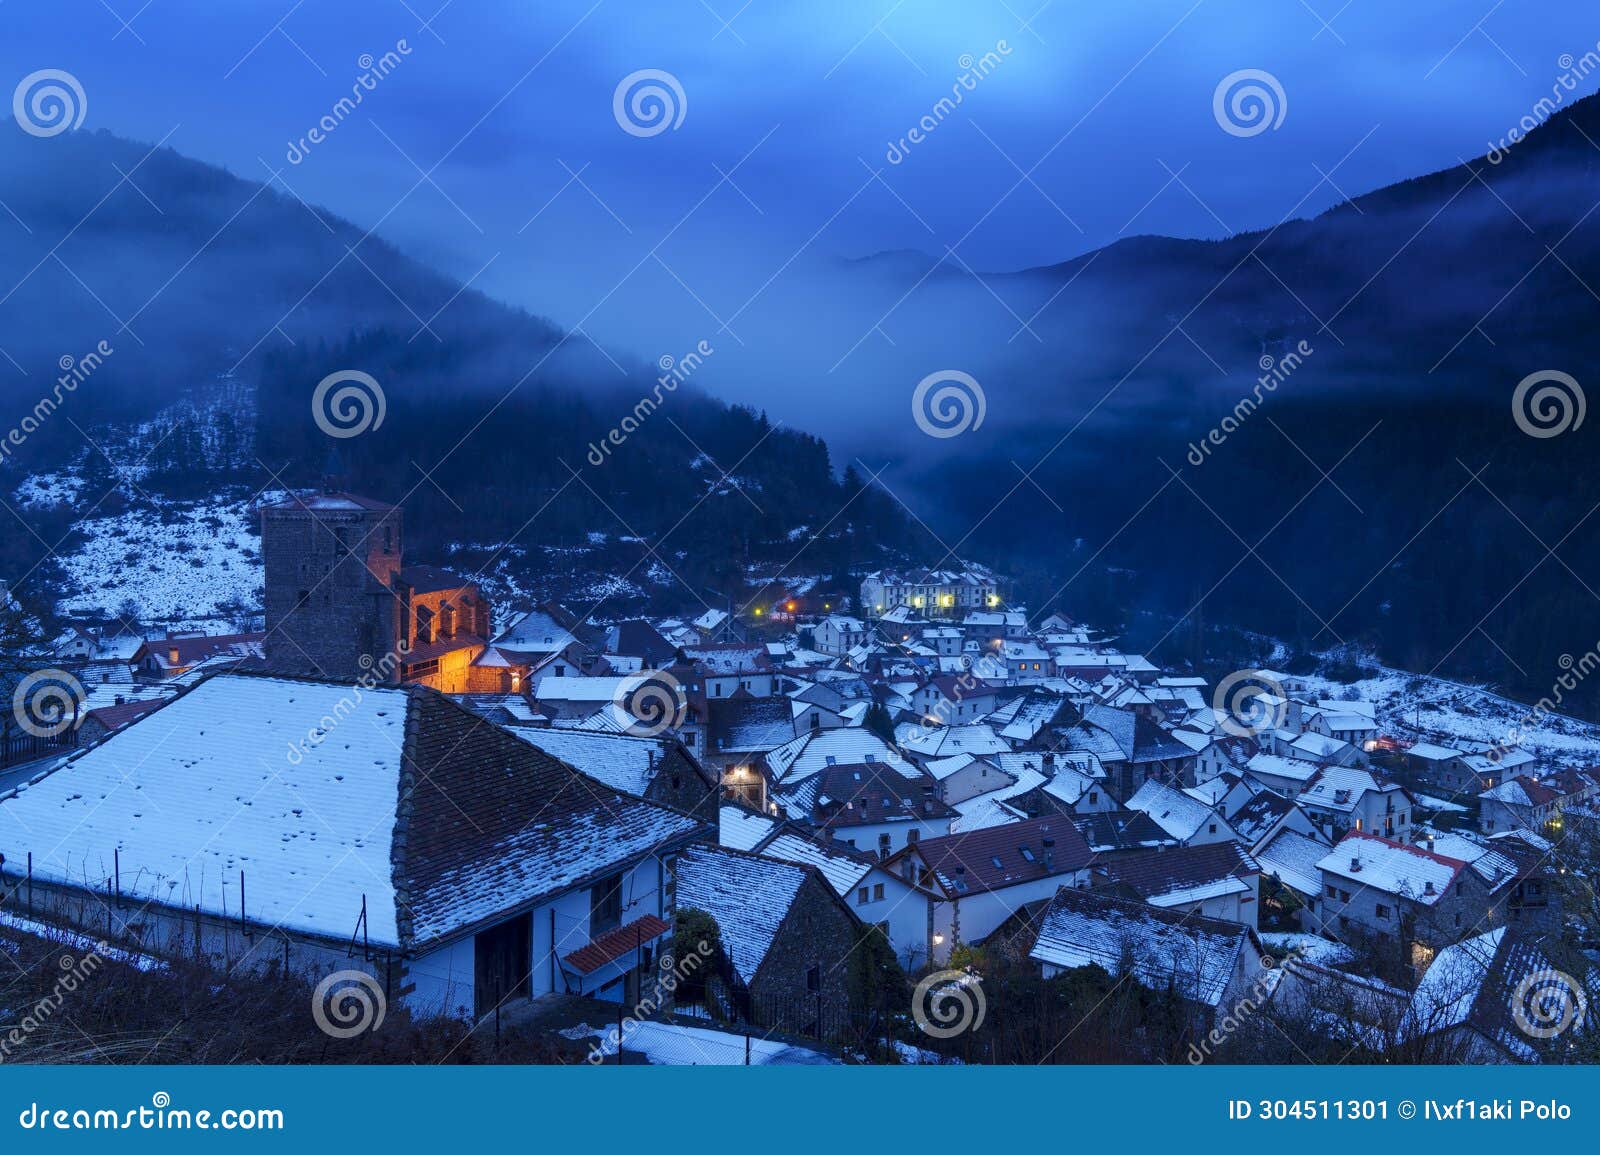 snow in isaba. isaba is a municipality in the comarca of roncal salazar.